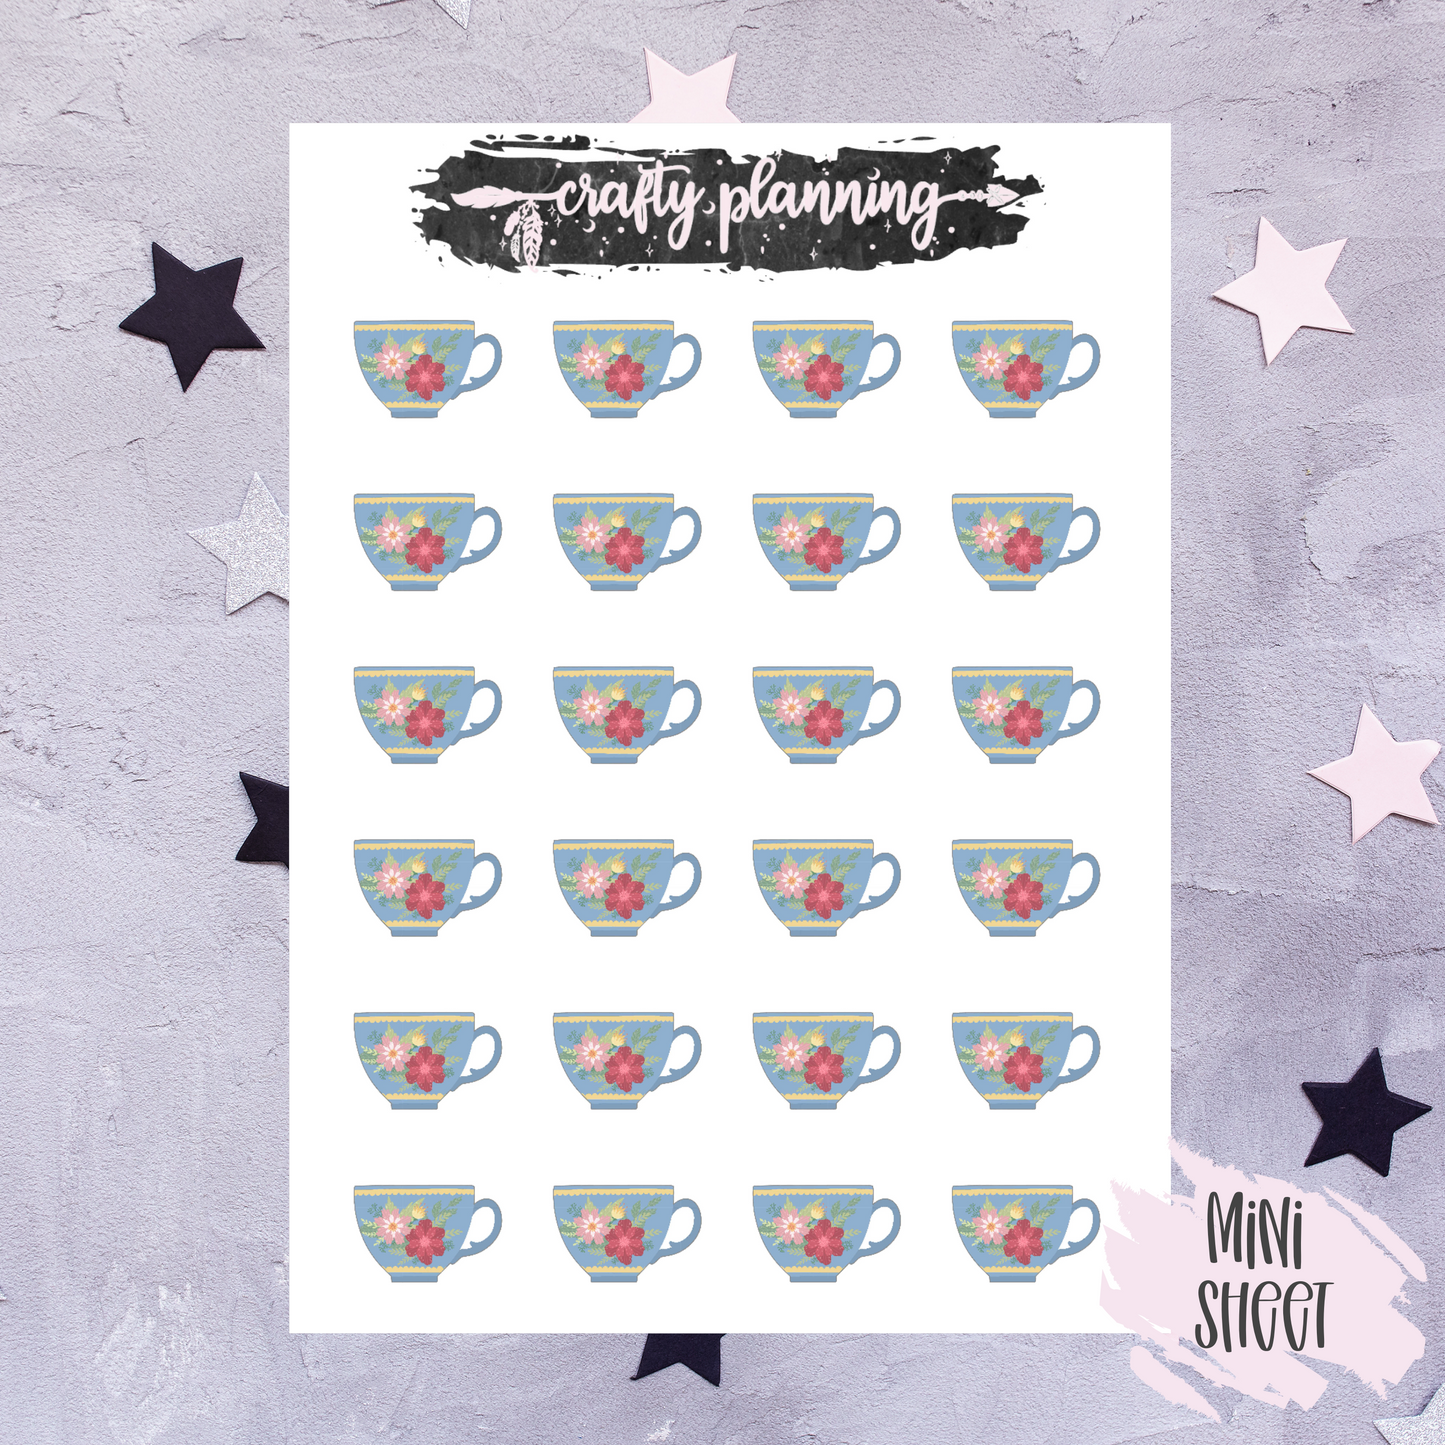 Teacup Stickers, Tea Stickers, Floral Stickers, Planner Stickers, Vintage Floral, Cup Stickers, Deco Stickers